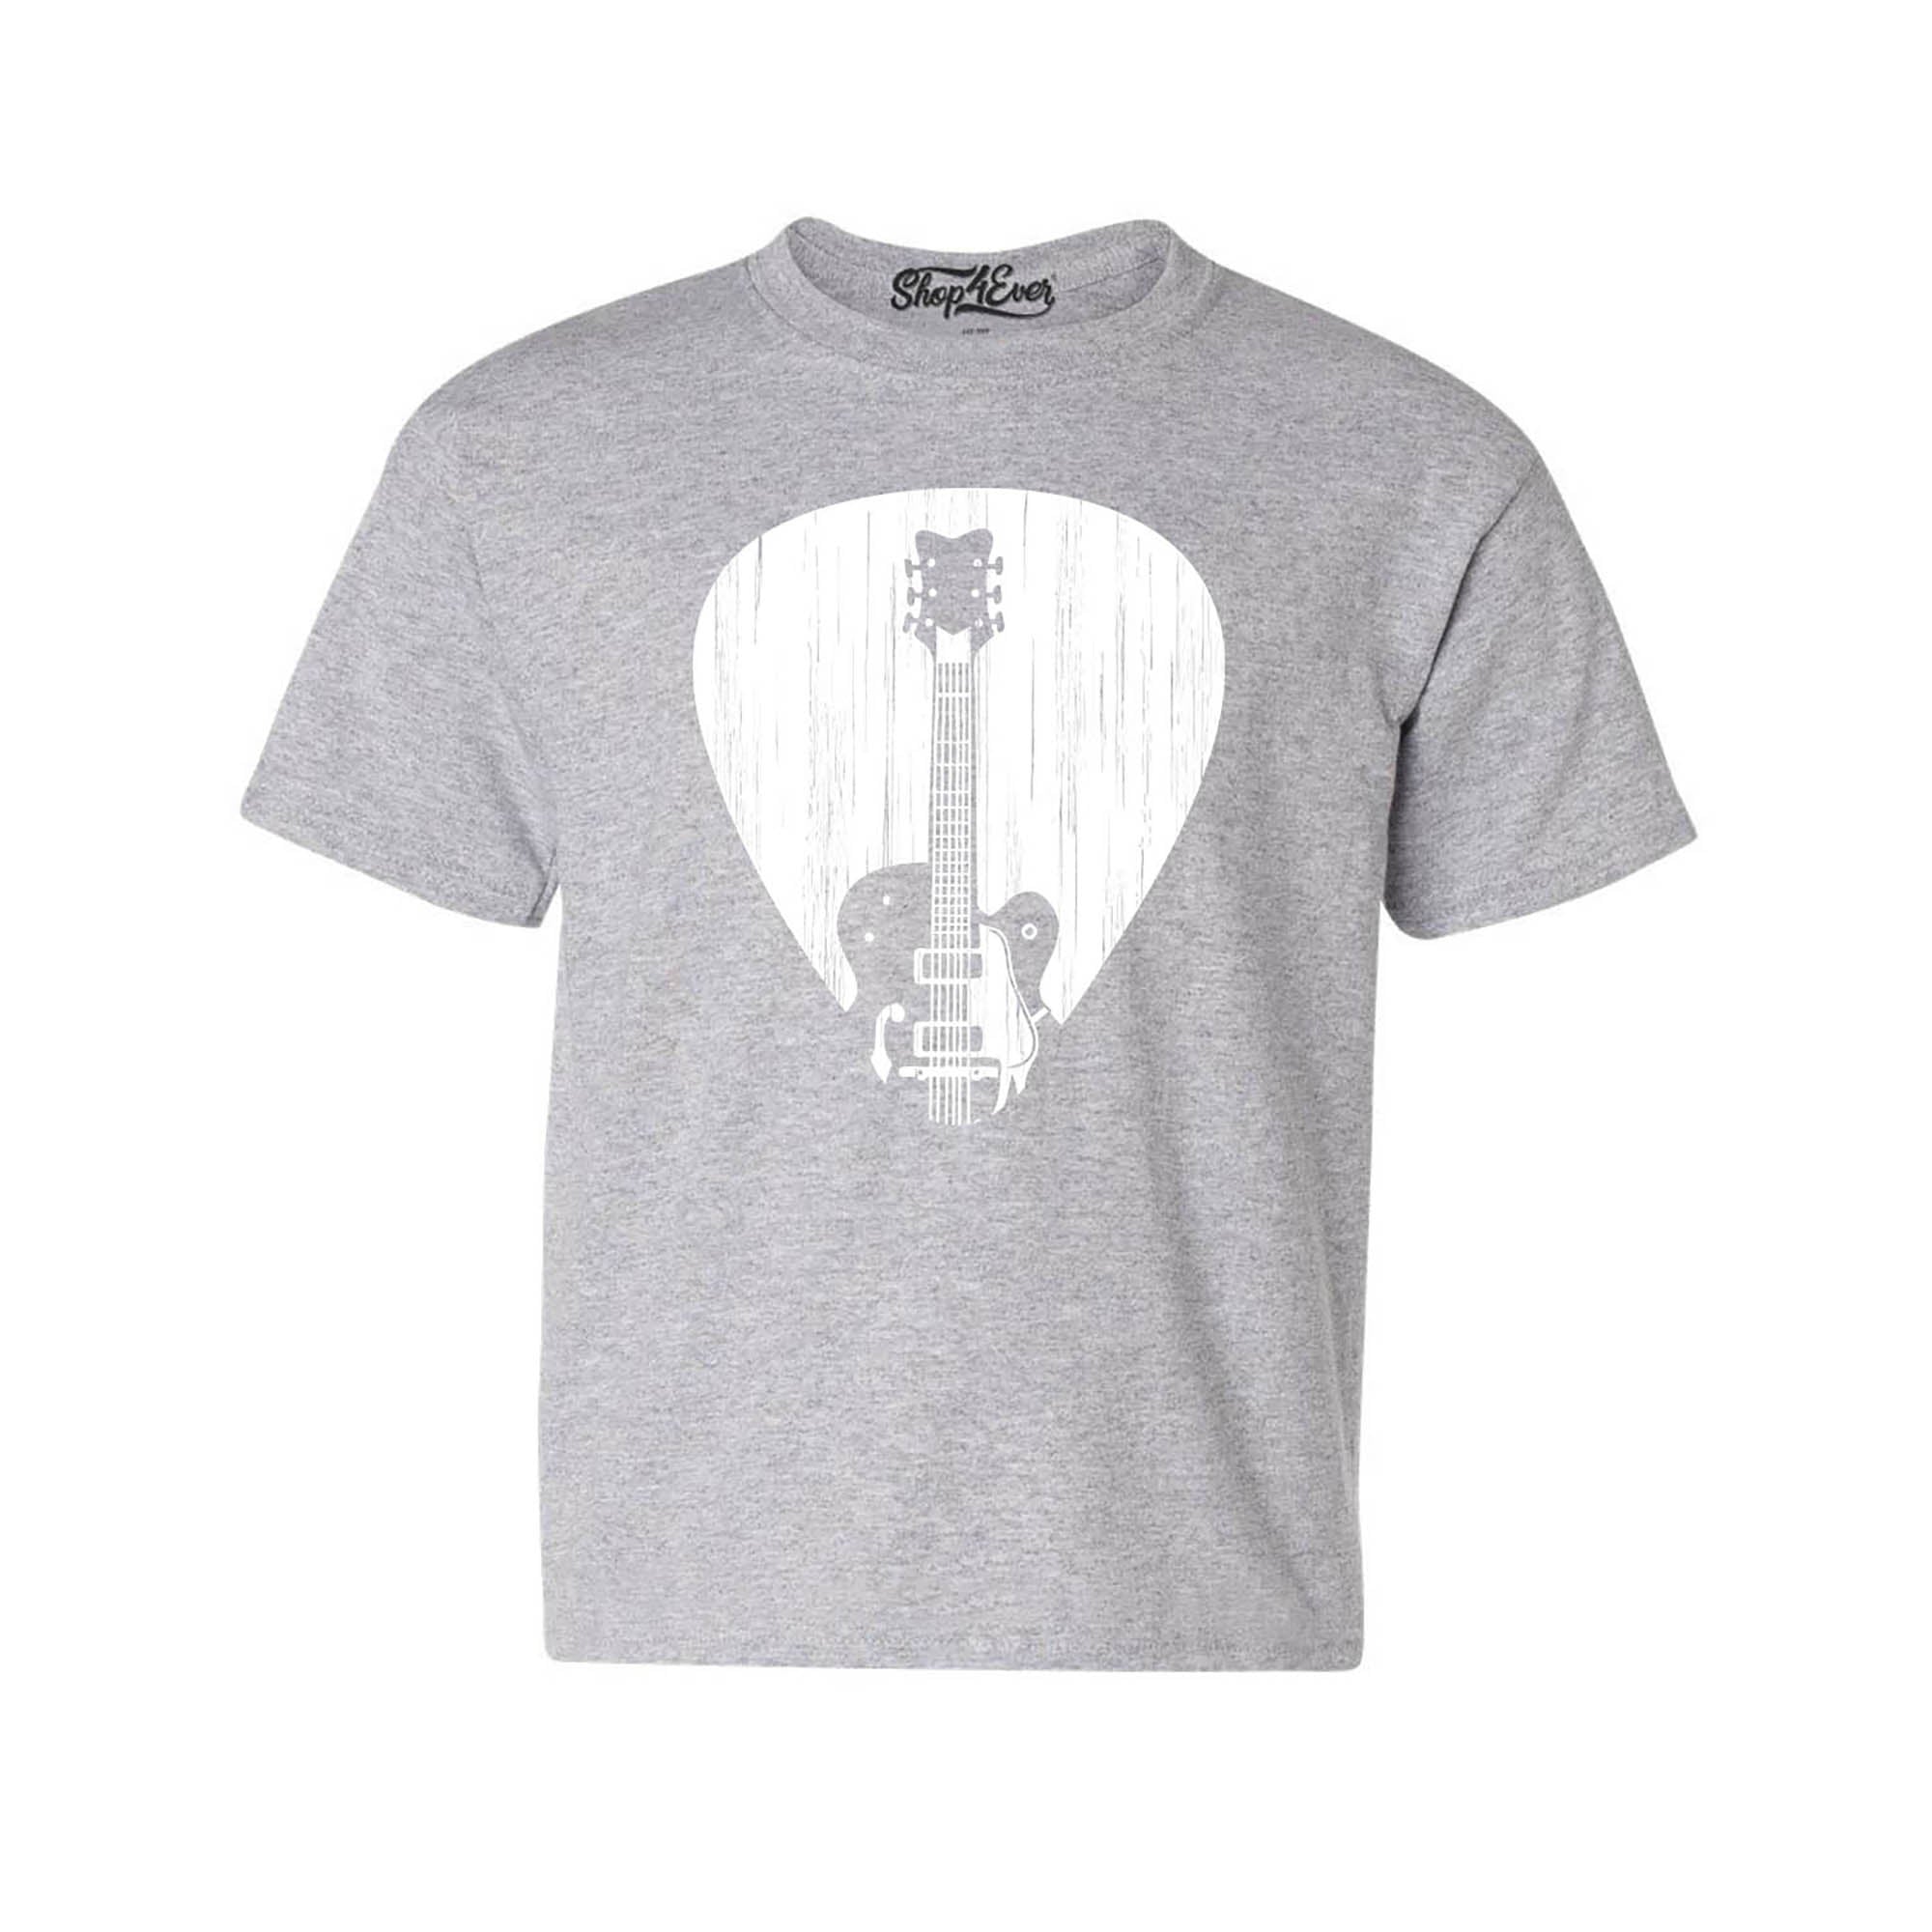 Electric Guitar Pick Musician Youth's T-Shirt